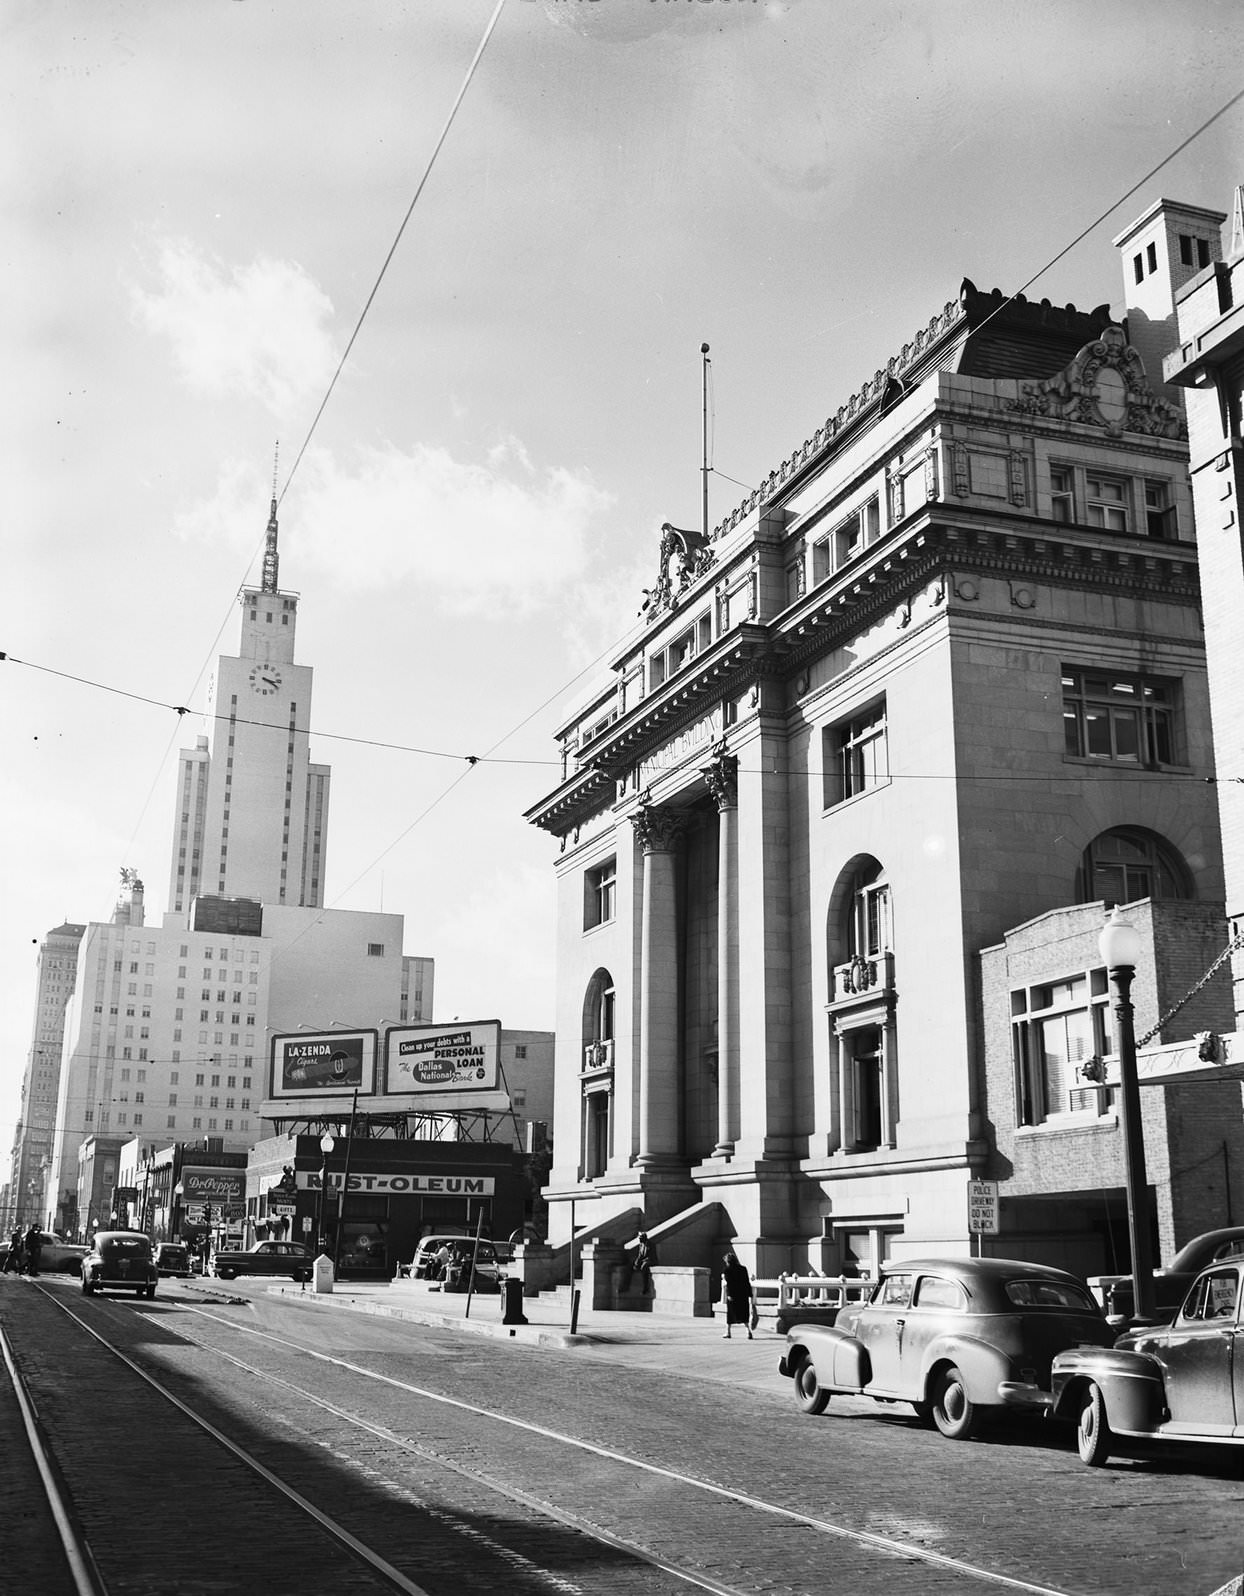 Downtown Dallas with city hall building, 1950